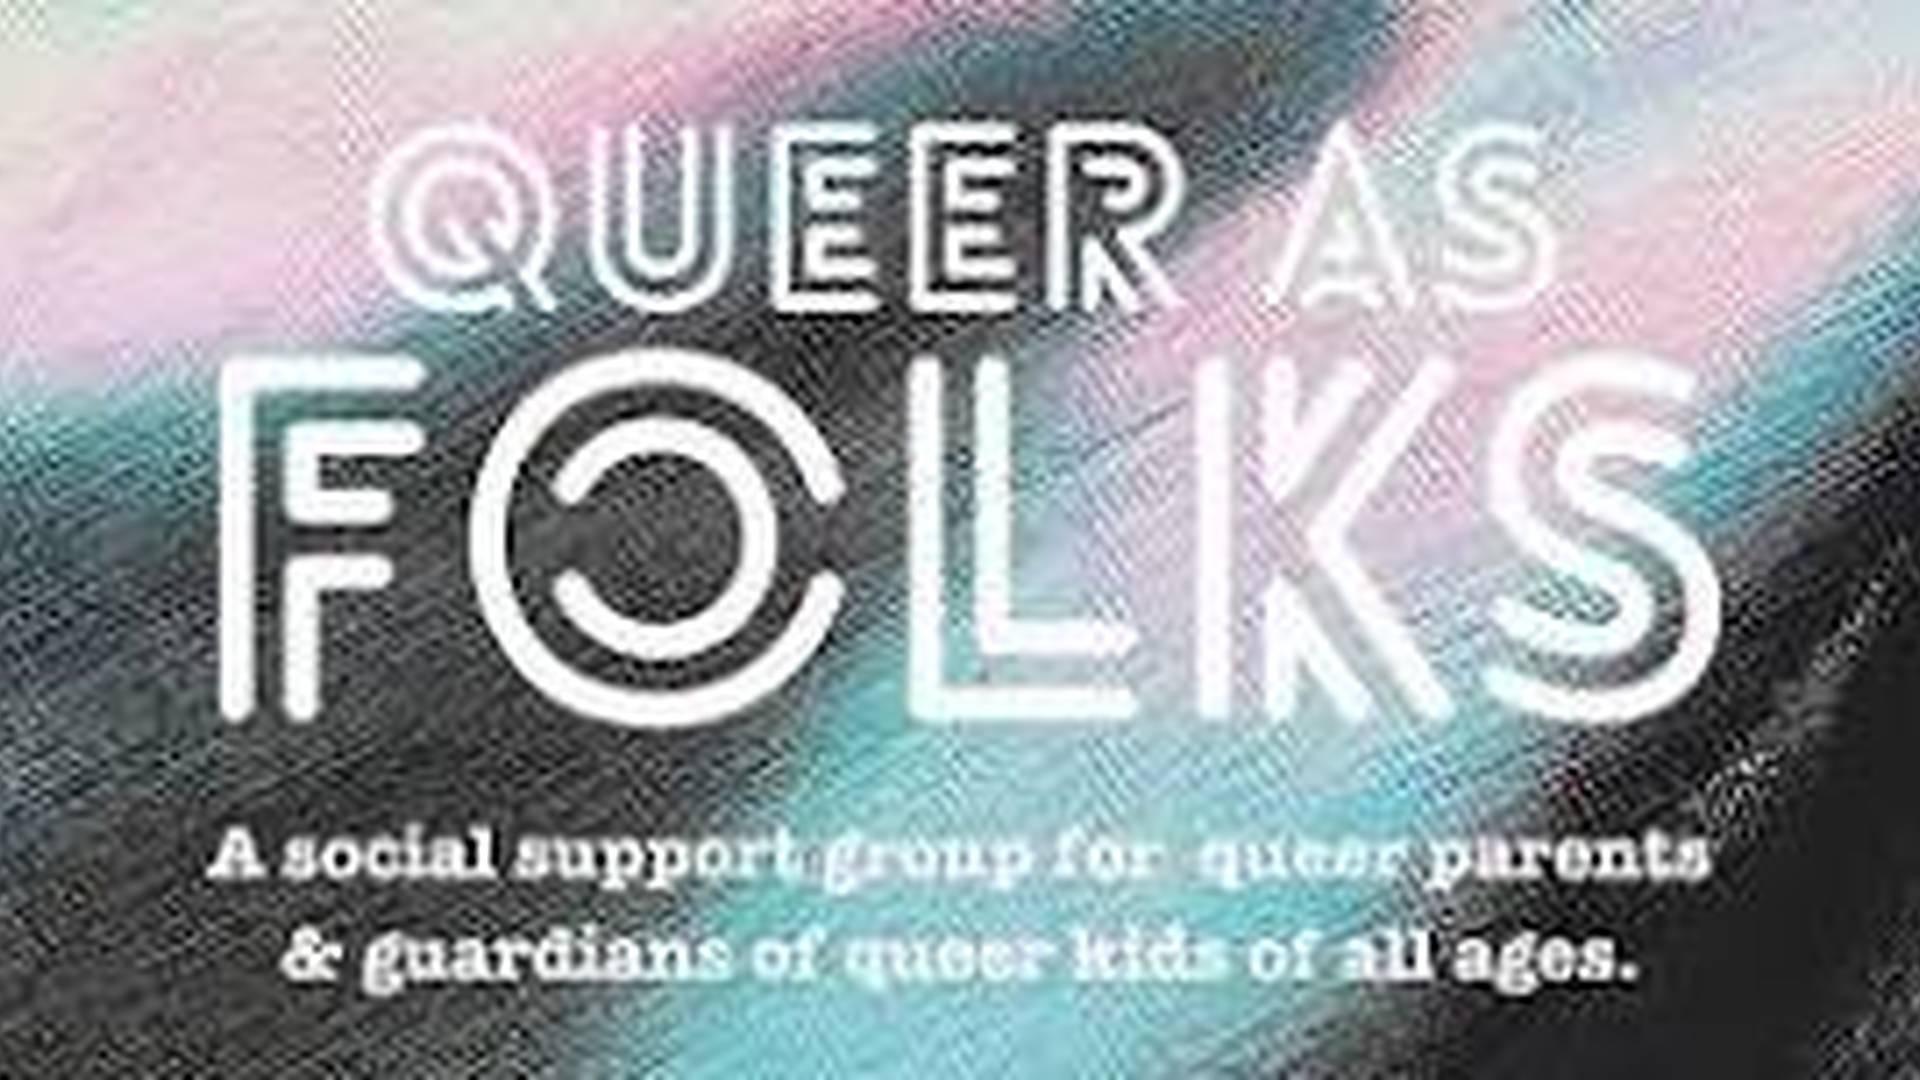 Queer as folks - a social support group for the parents of queer kids. photo